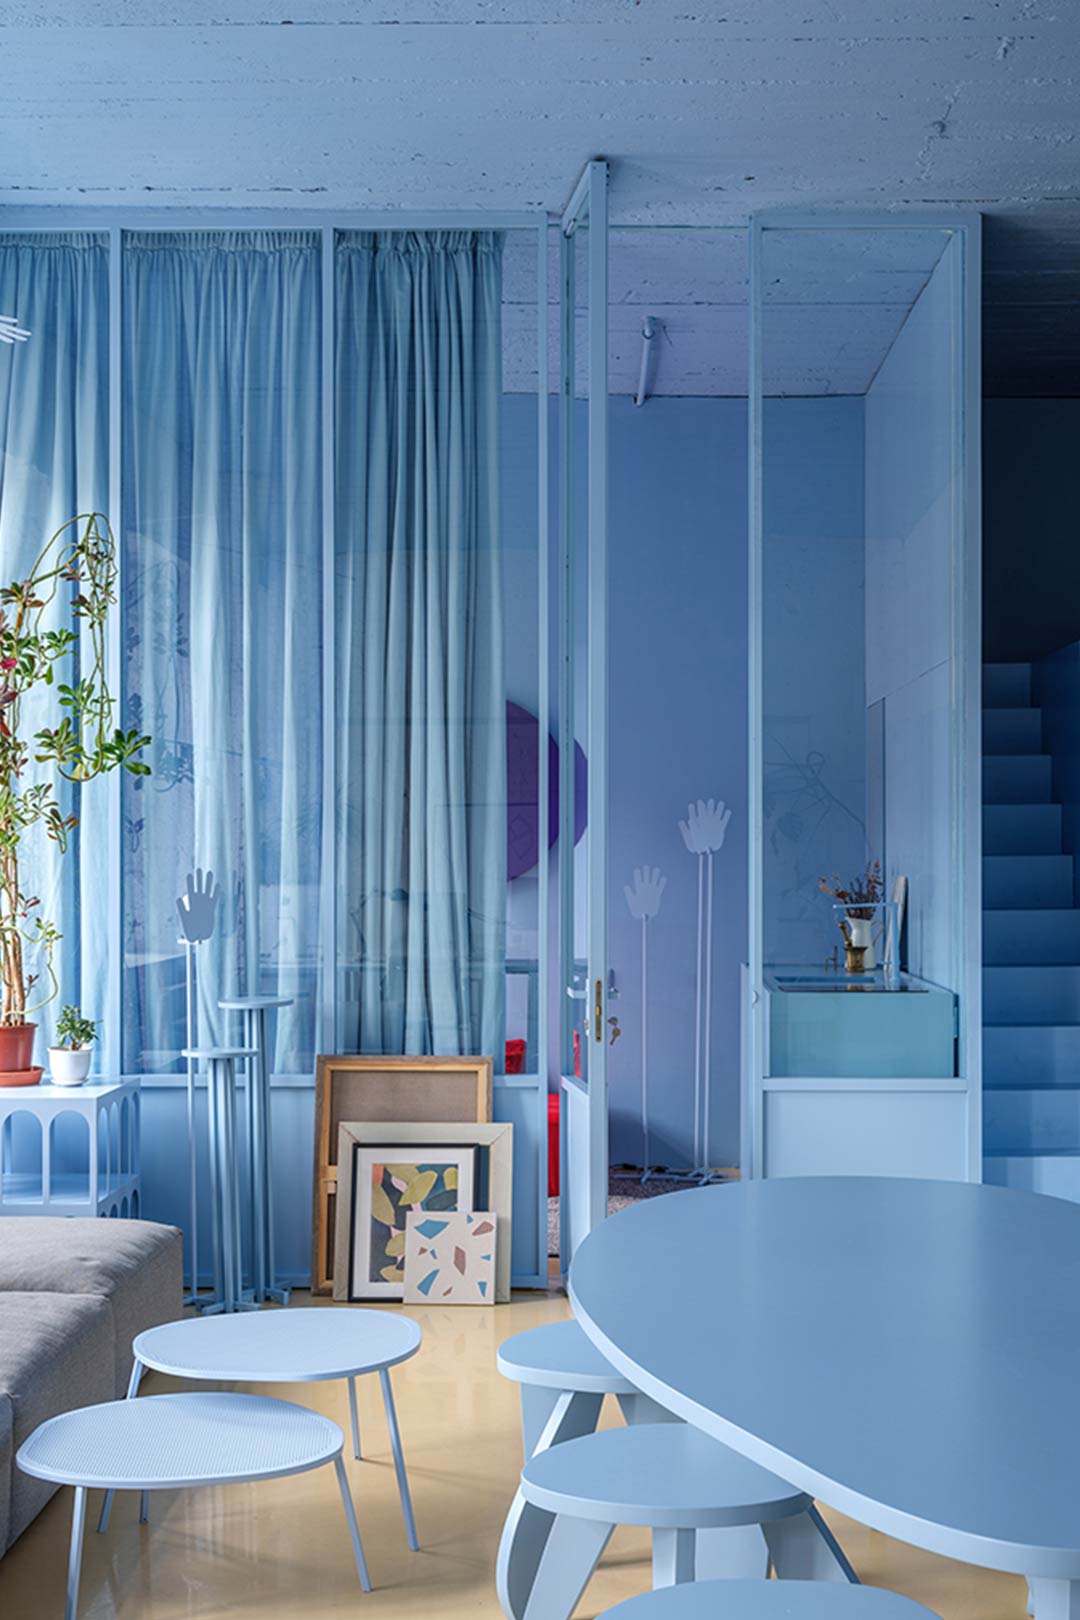 A blue monochromatic room with different textures